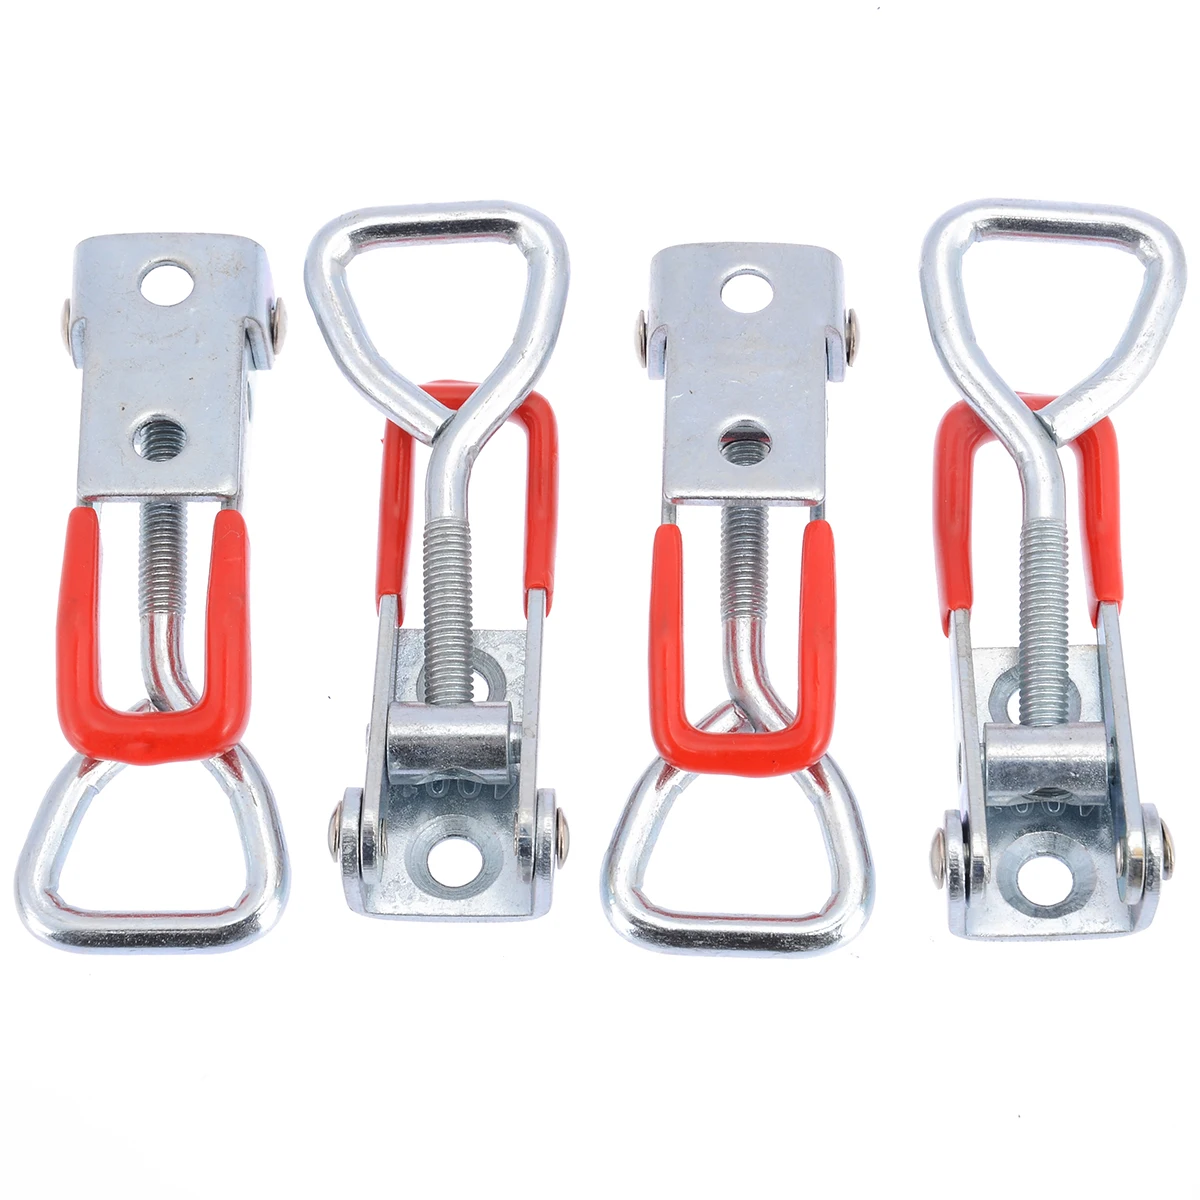 4PCS Adjustable Toggle Latch Catches Lock Spring Loaded Toggle Case Box ...